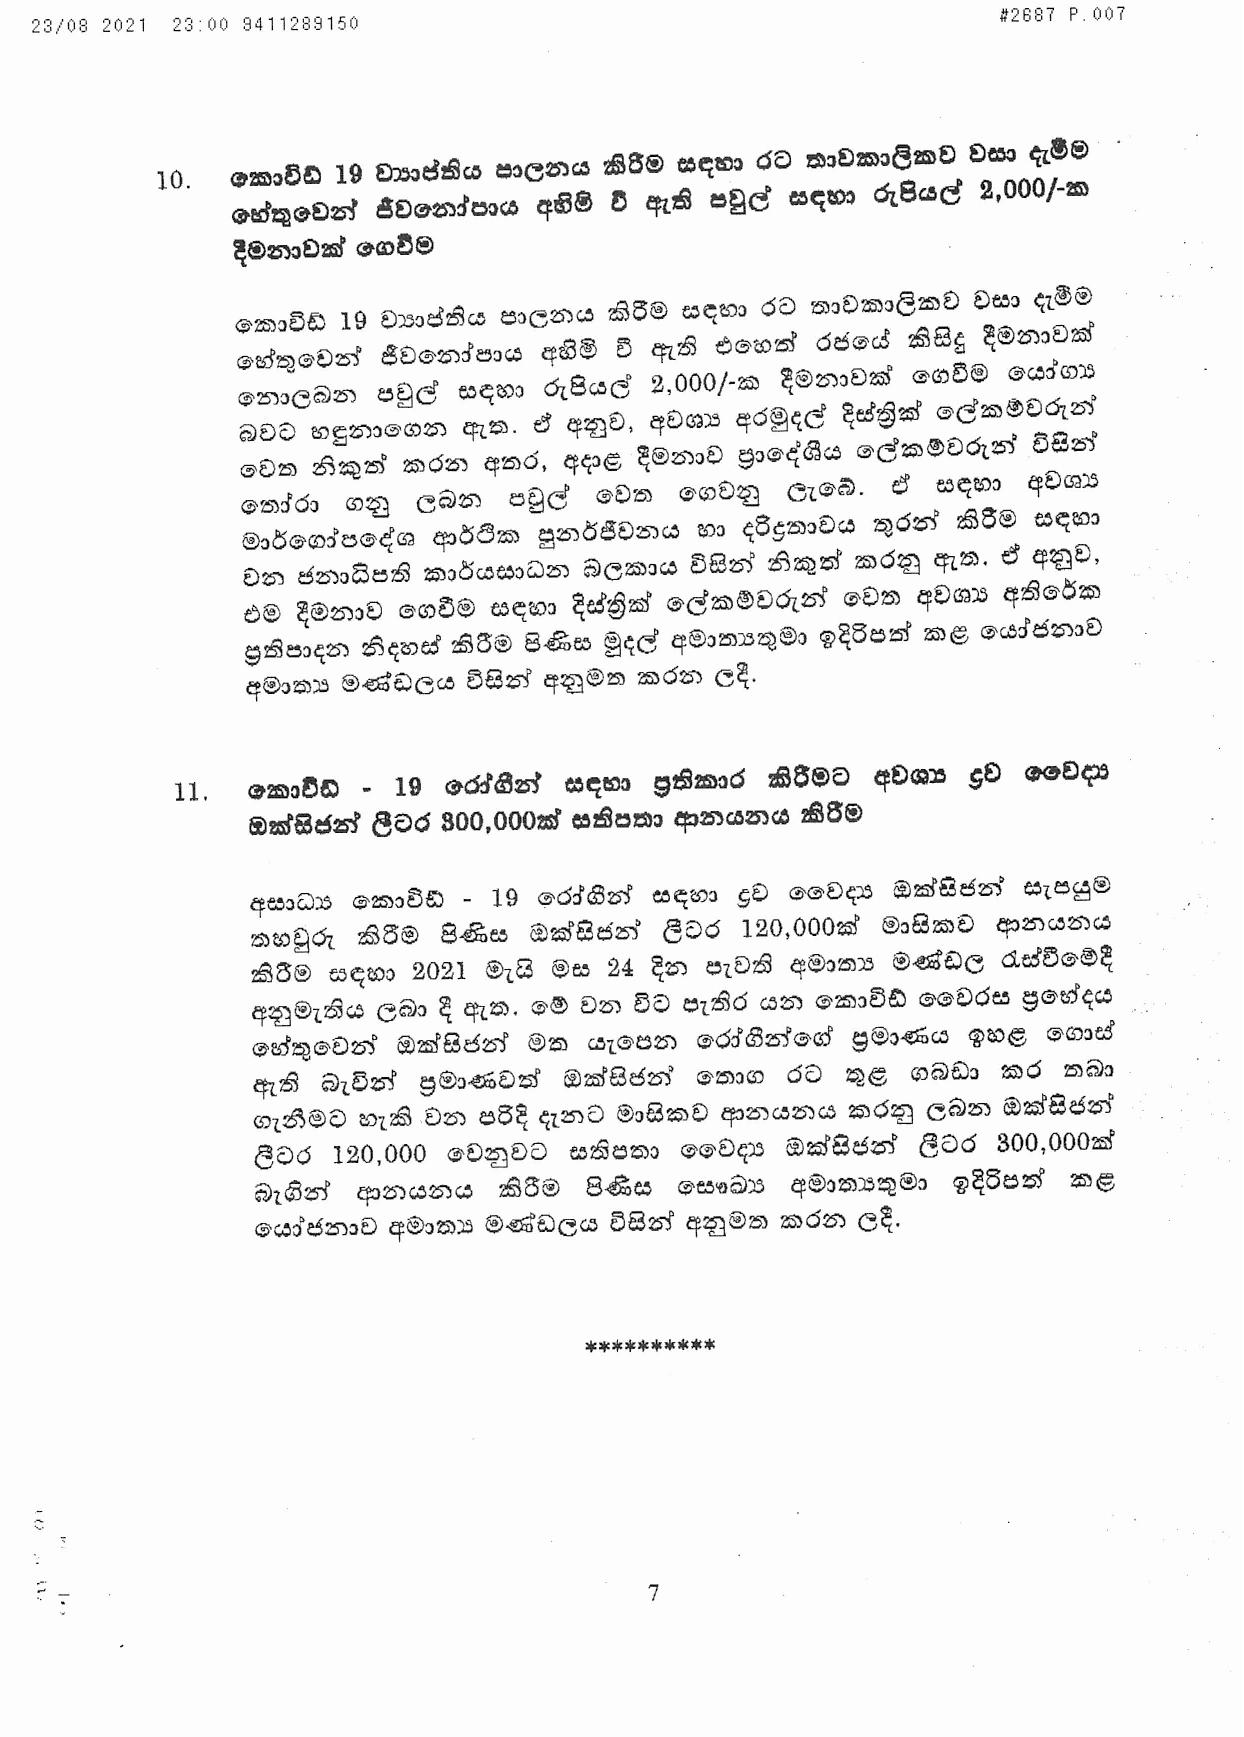 Cabinet Decision on 23.08.2021 page 007